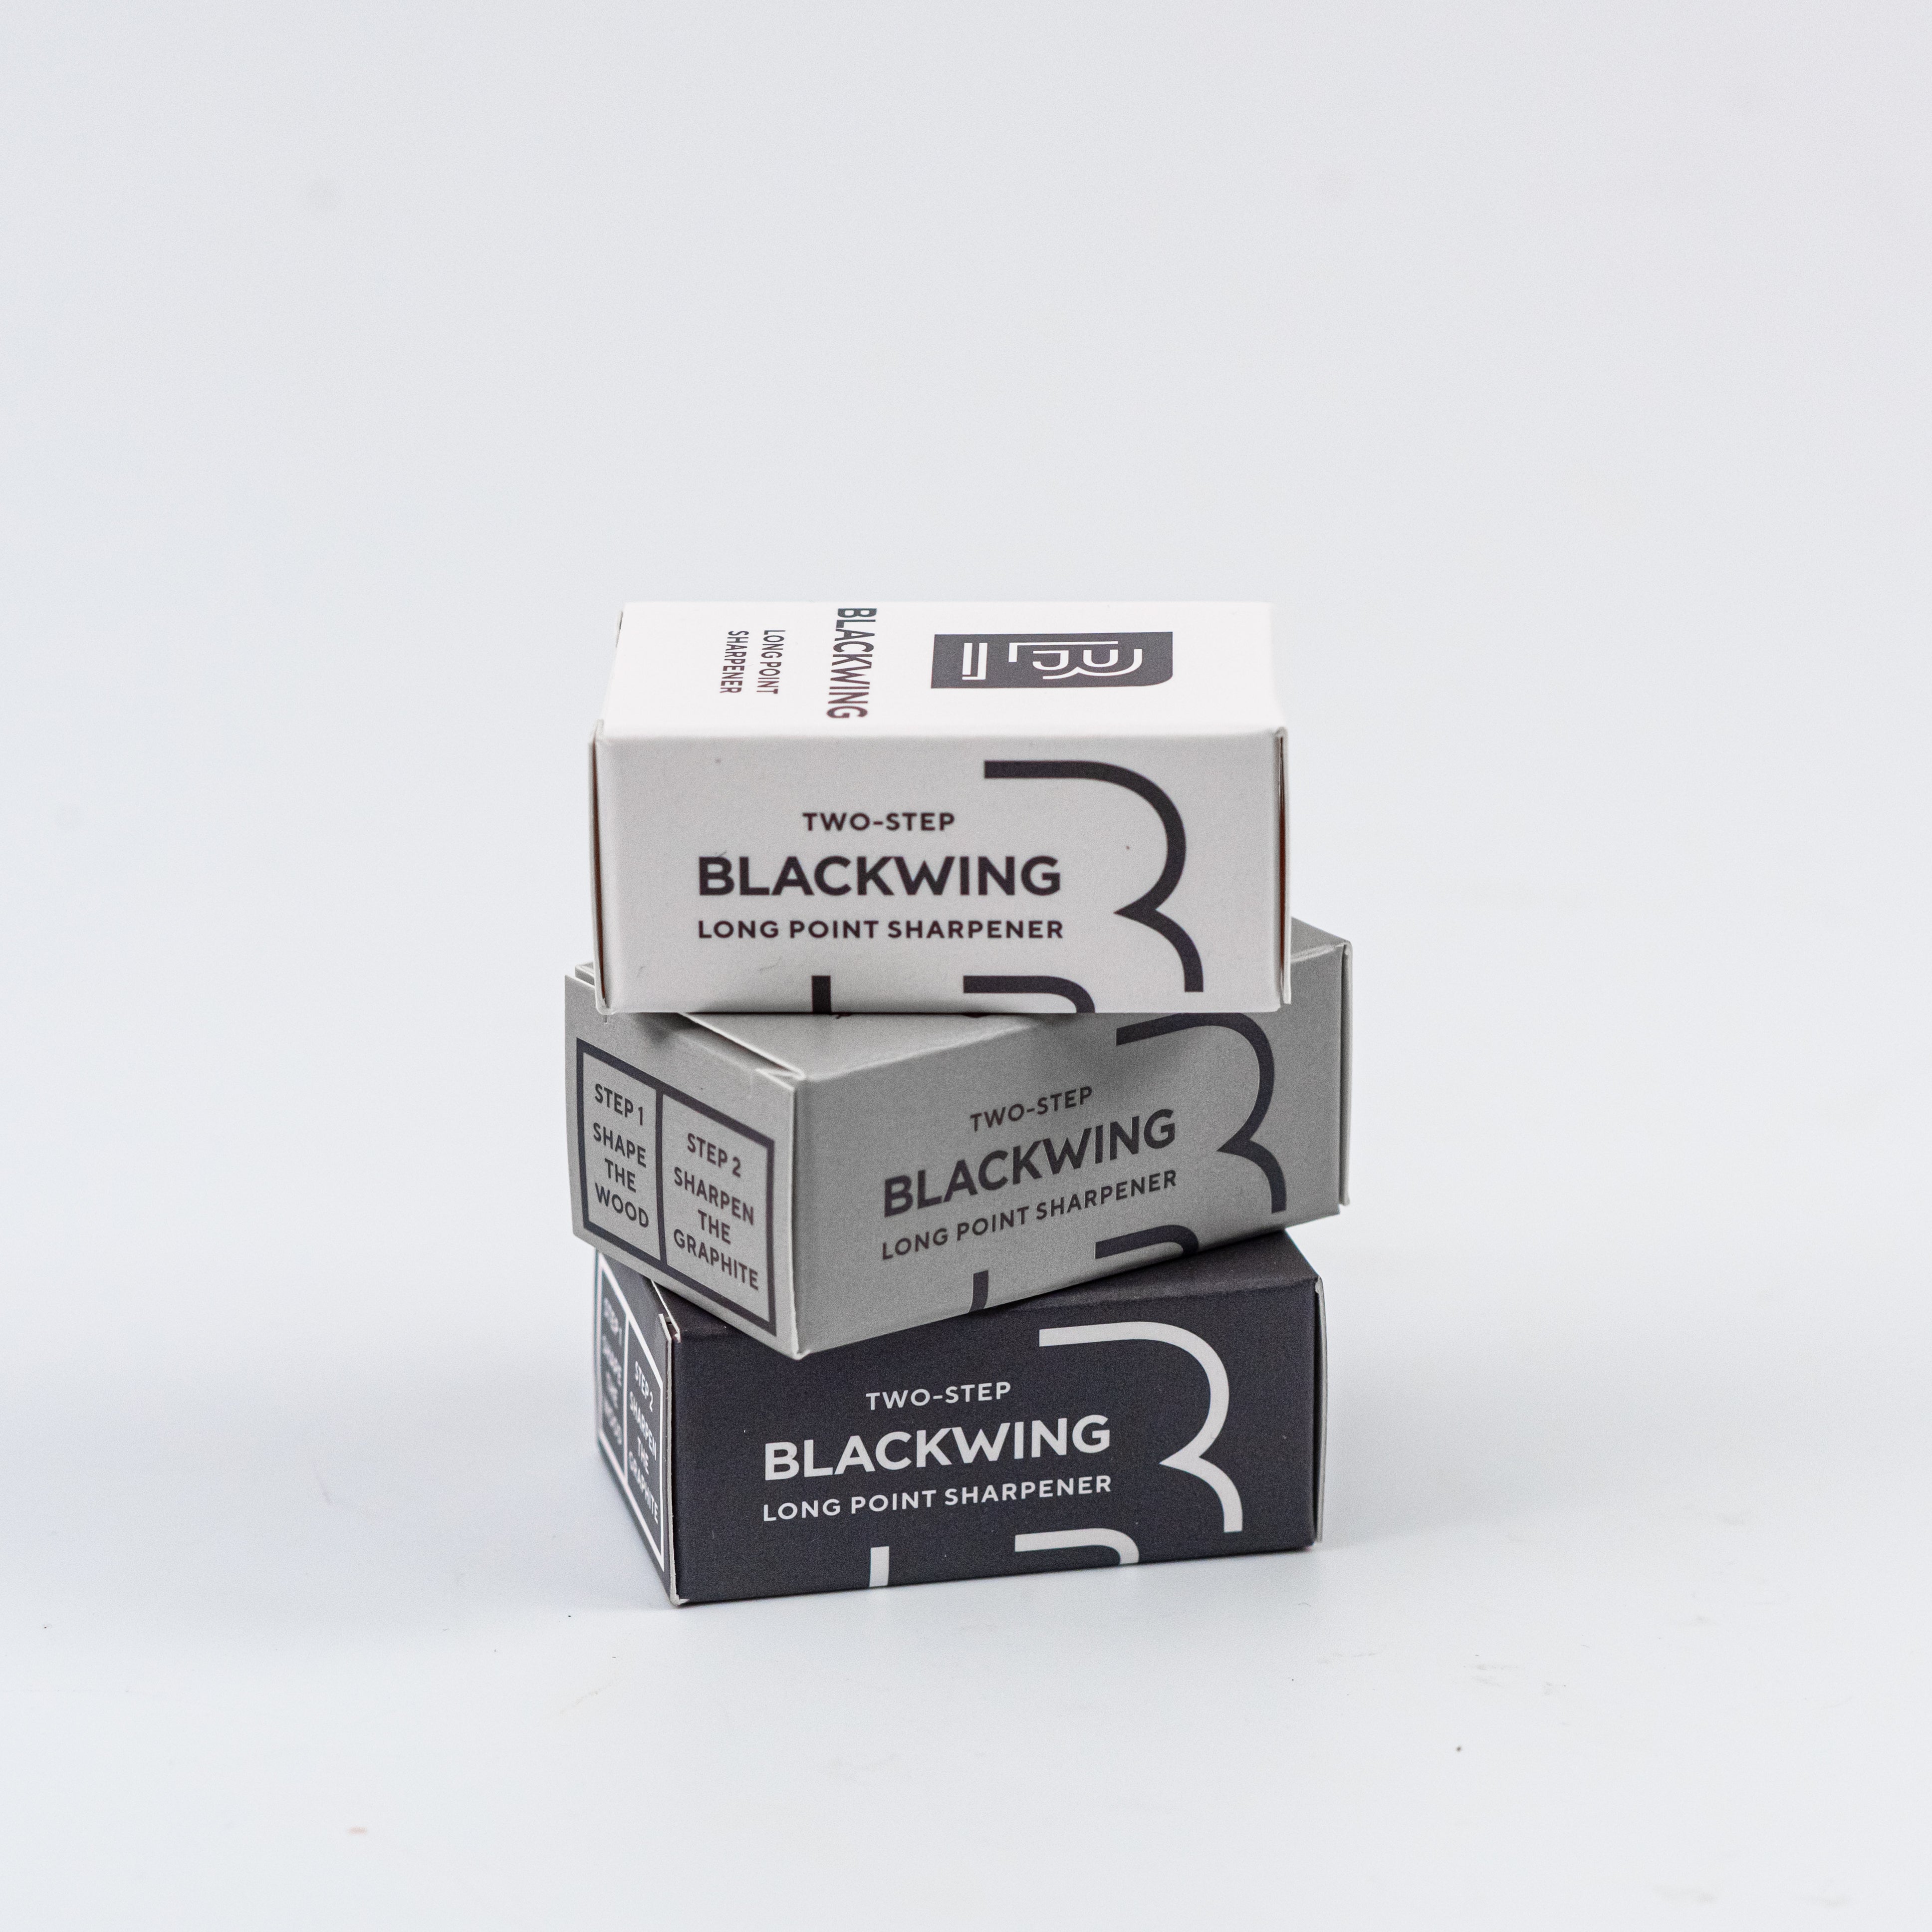 Blackwing Two-Step Long Point Sharpener Box